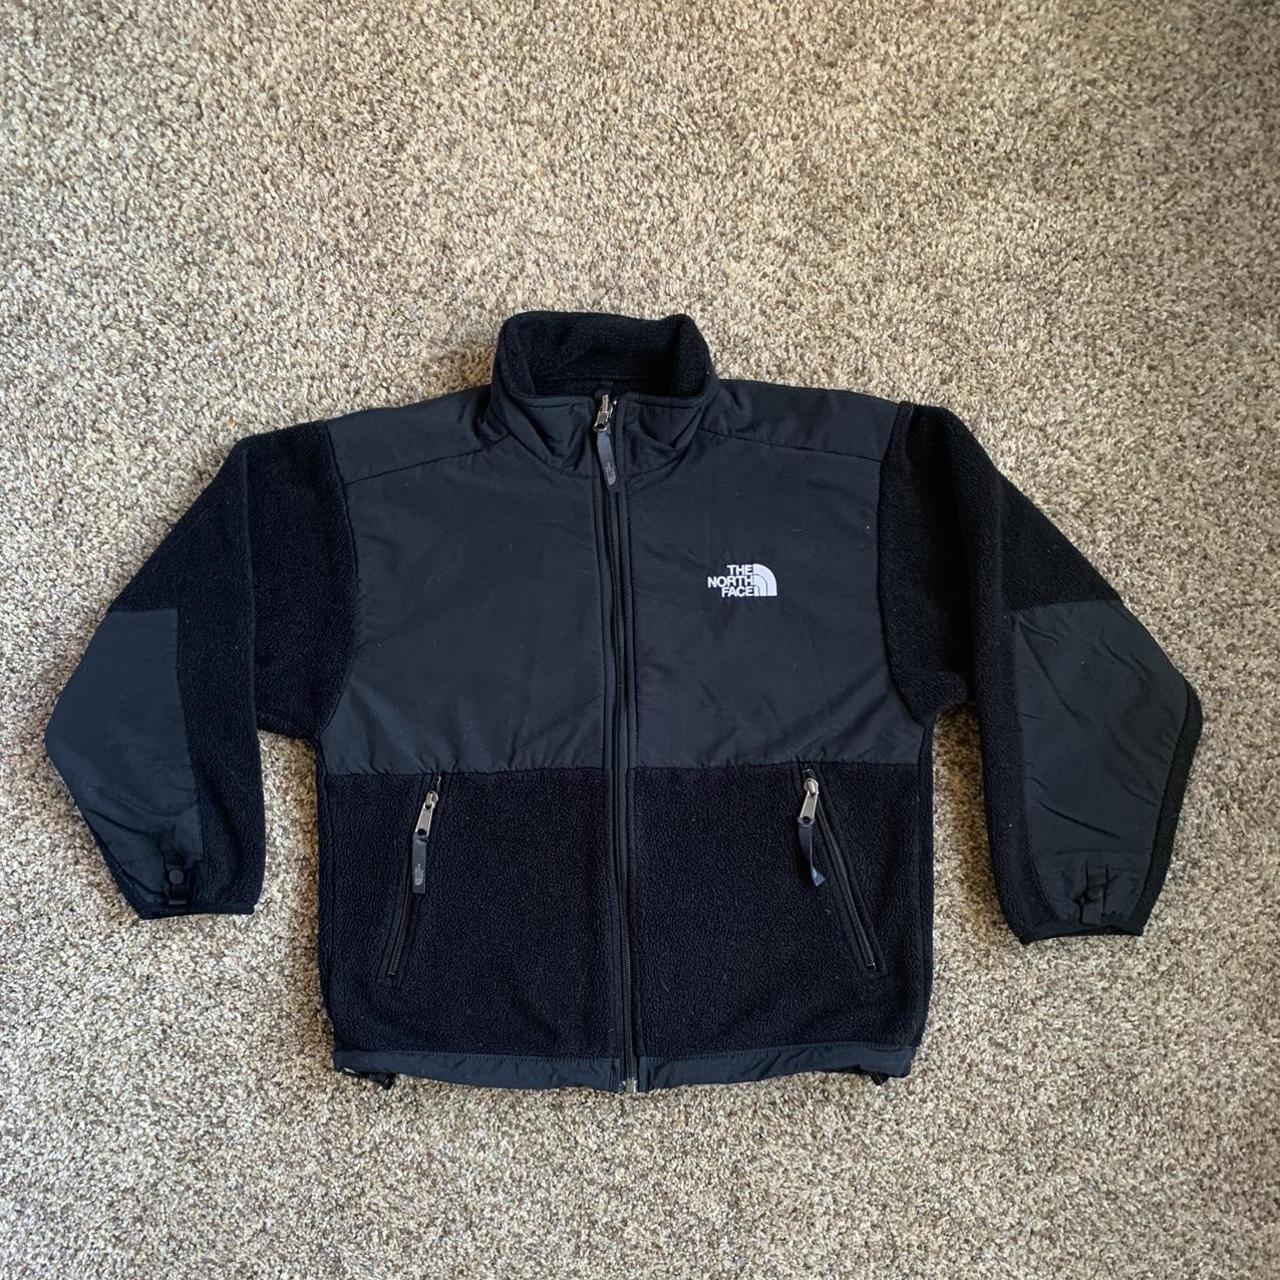 The North Face Women's Black and White Jacket